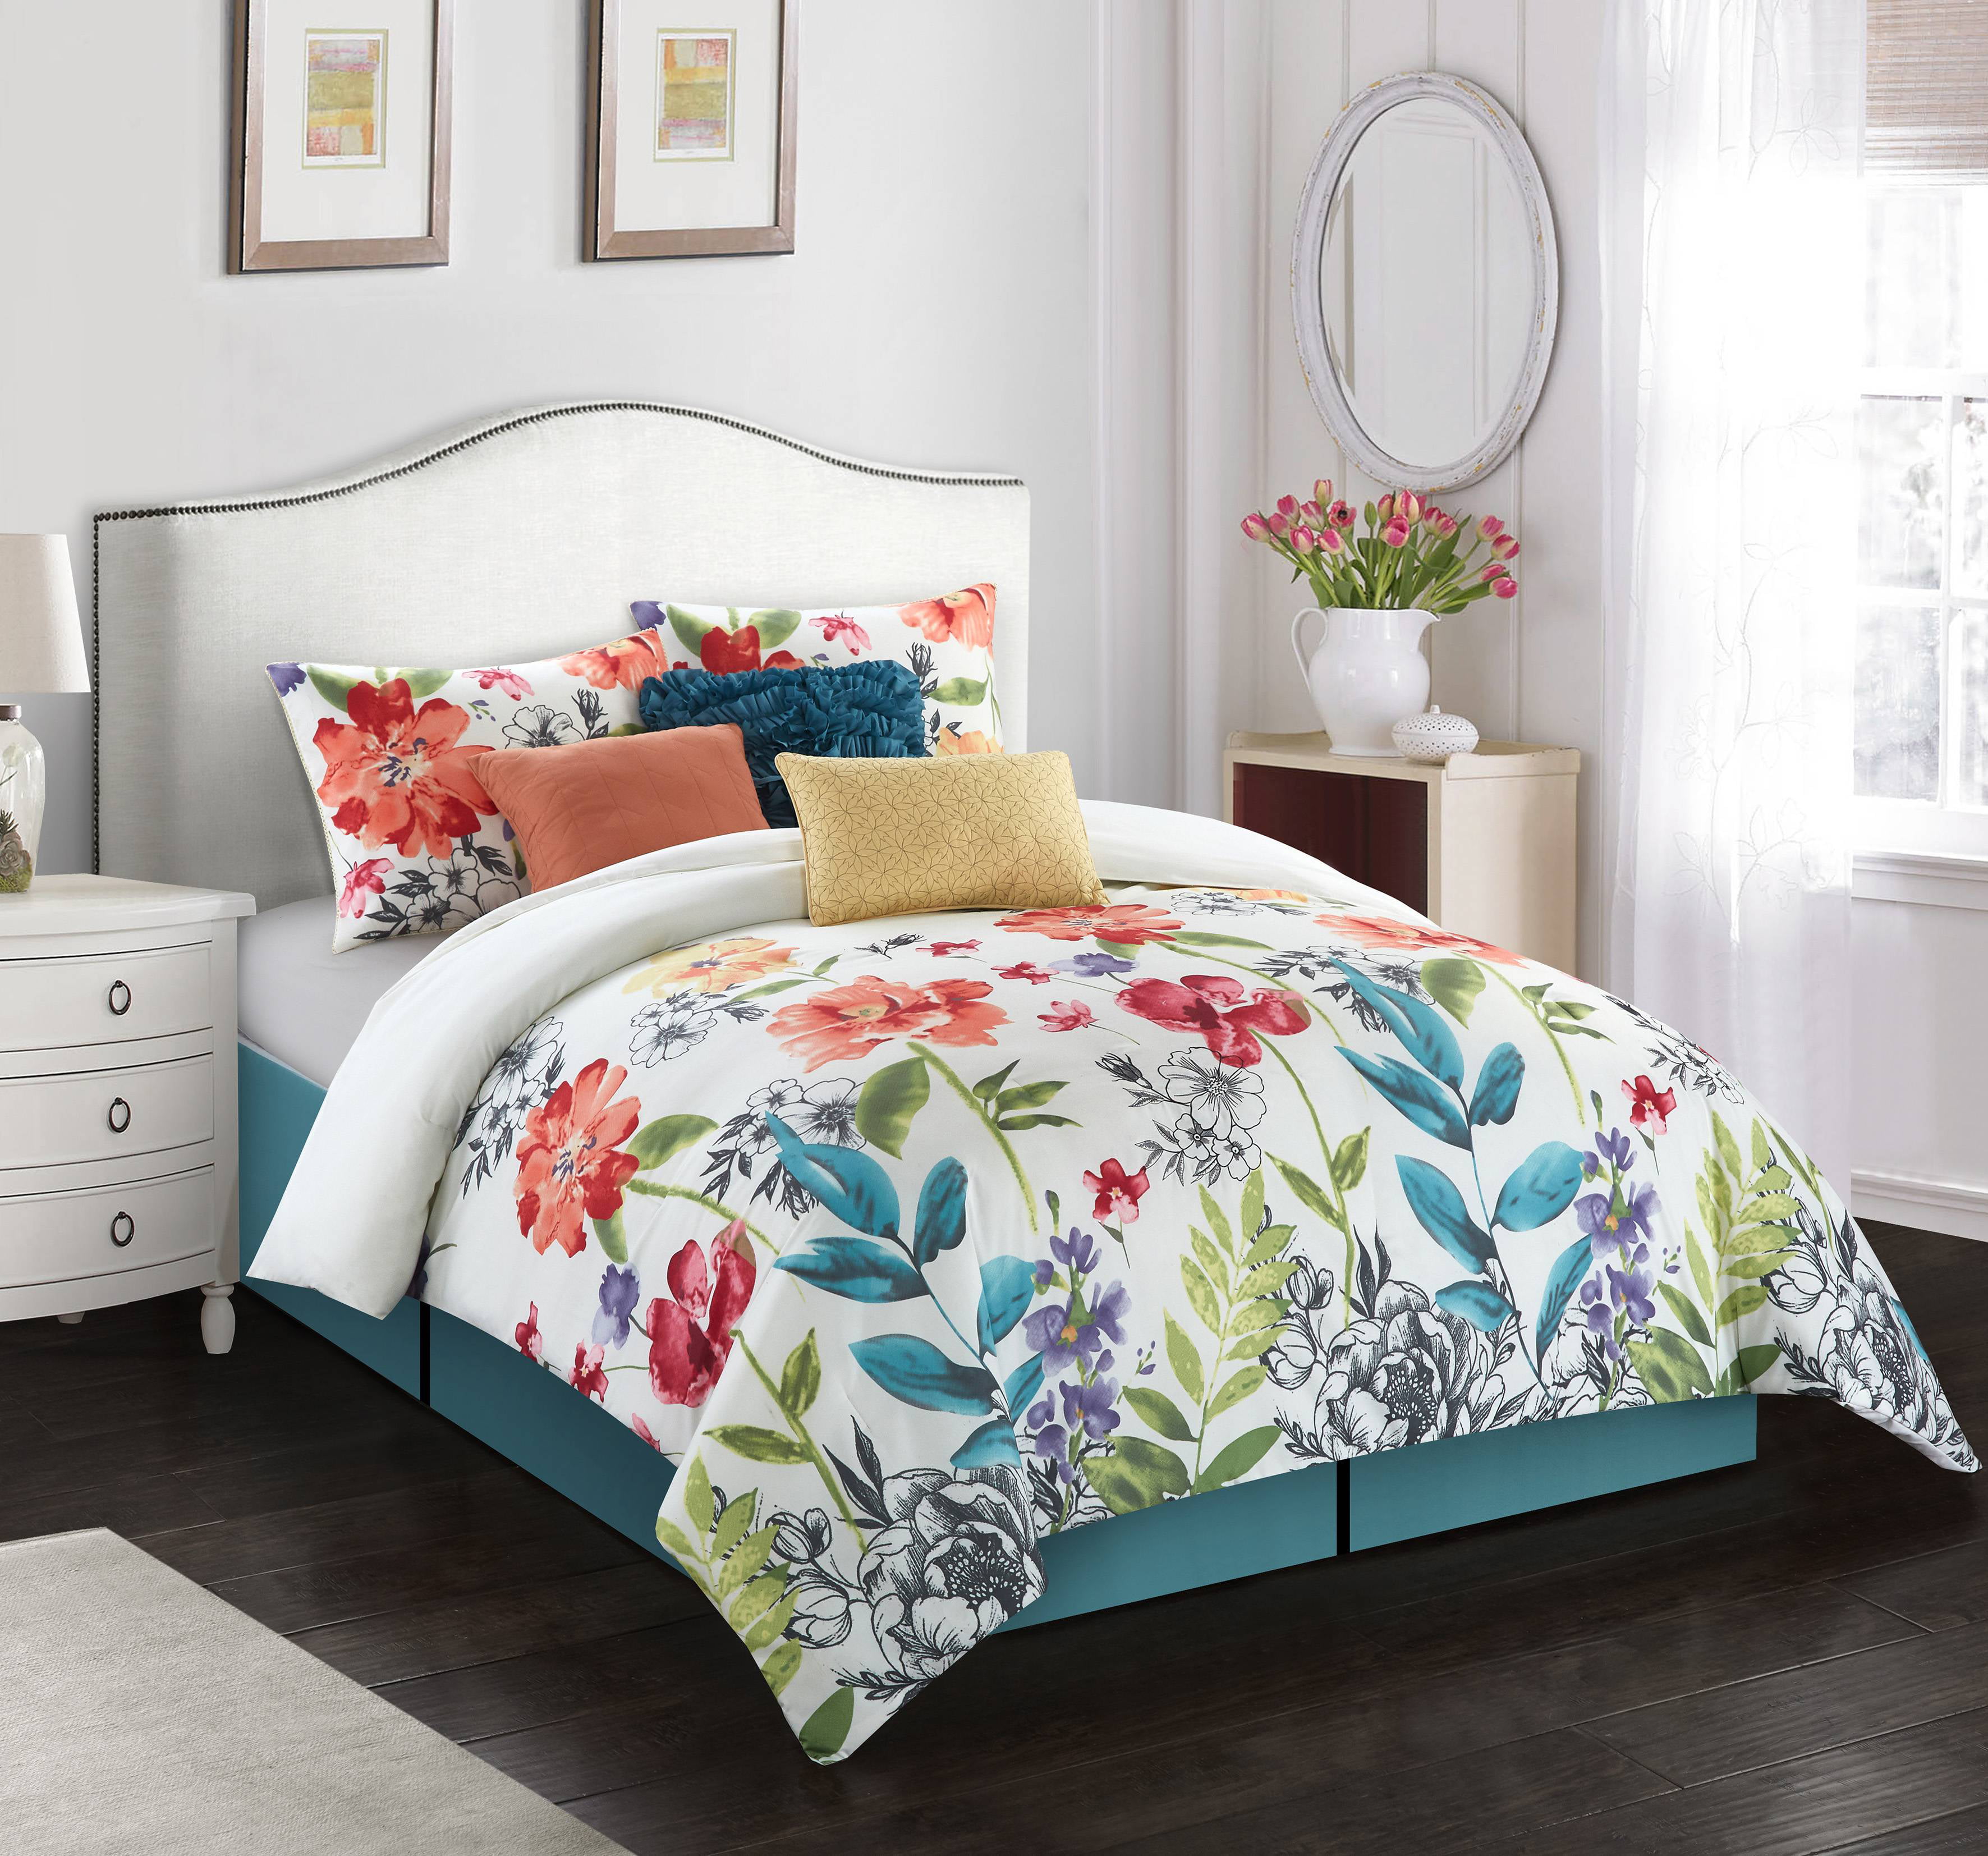 Full Queen Comforter Set, Colorful Bedding King